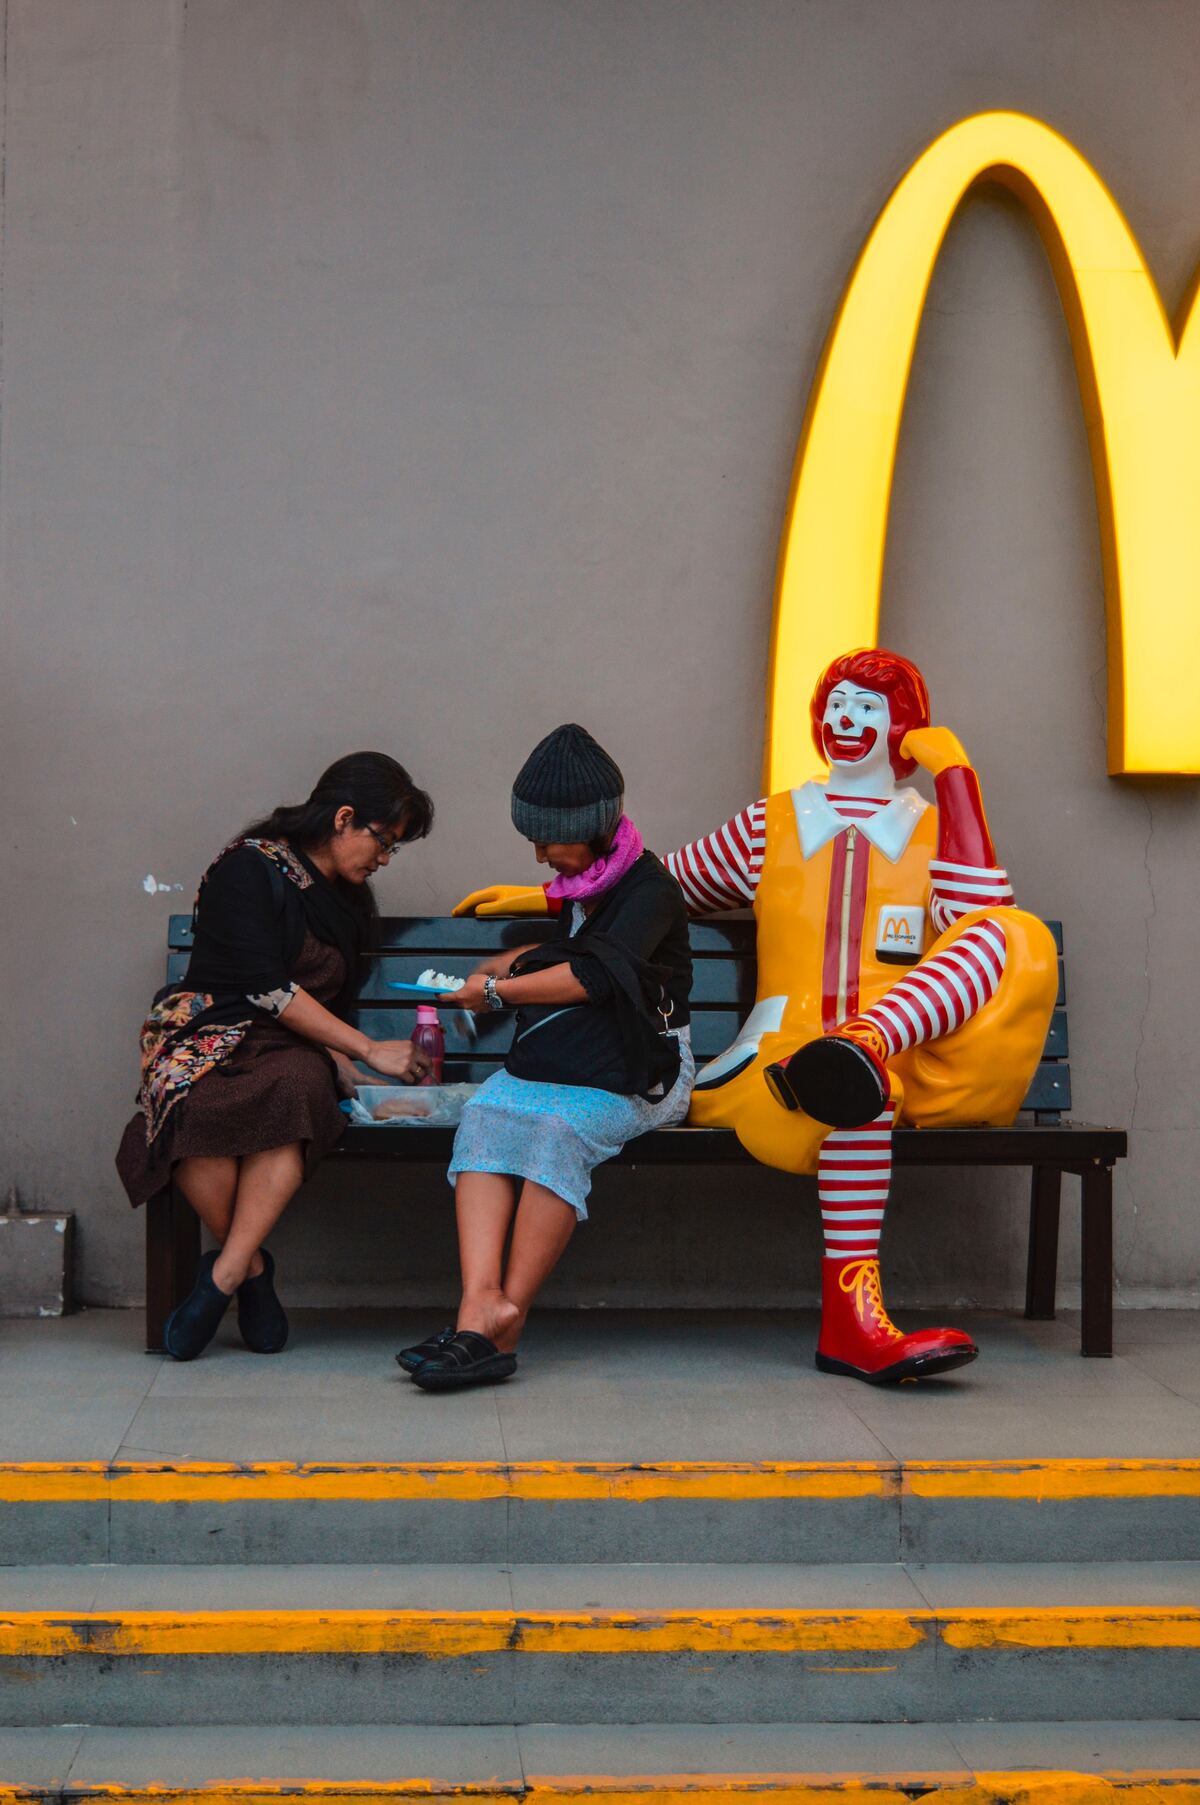 Two ladies share a meal on a bench with Ronald Mcdonald beside them.